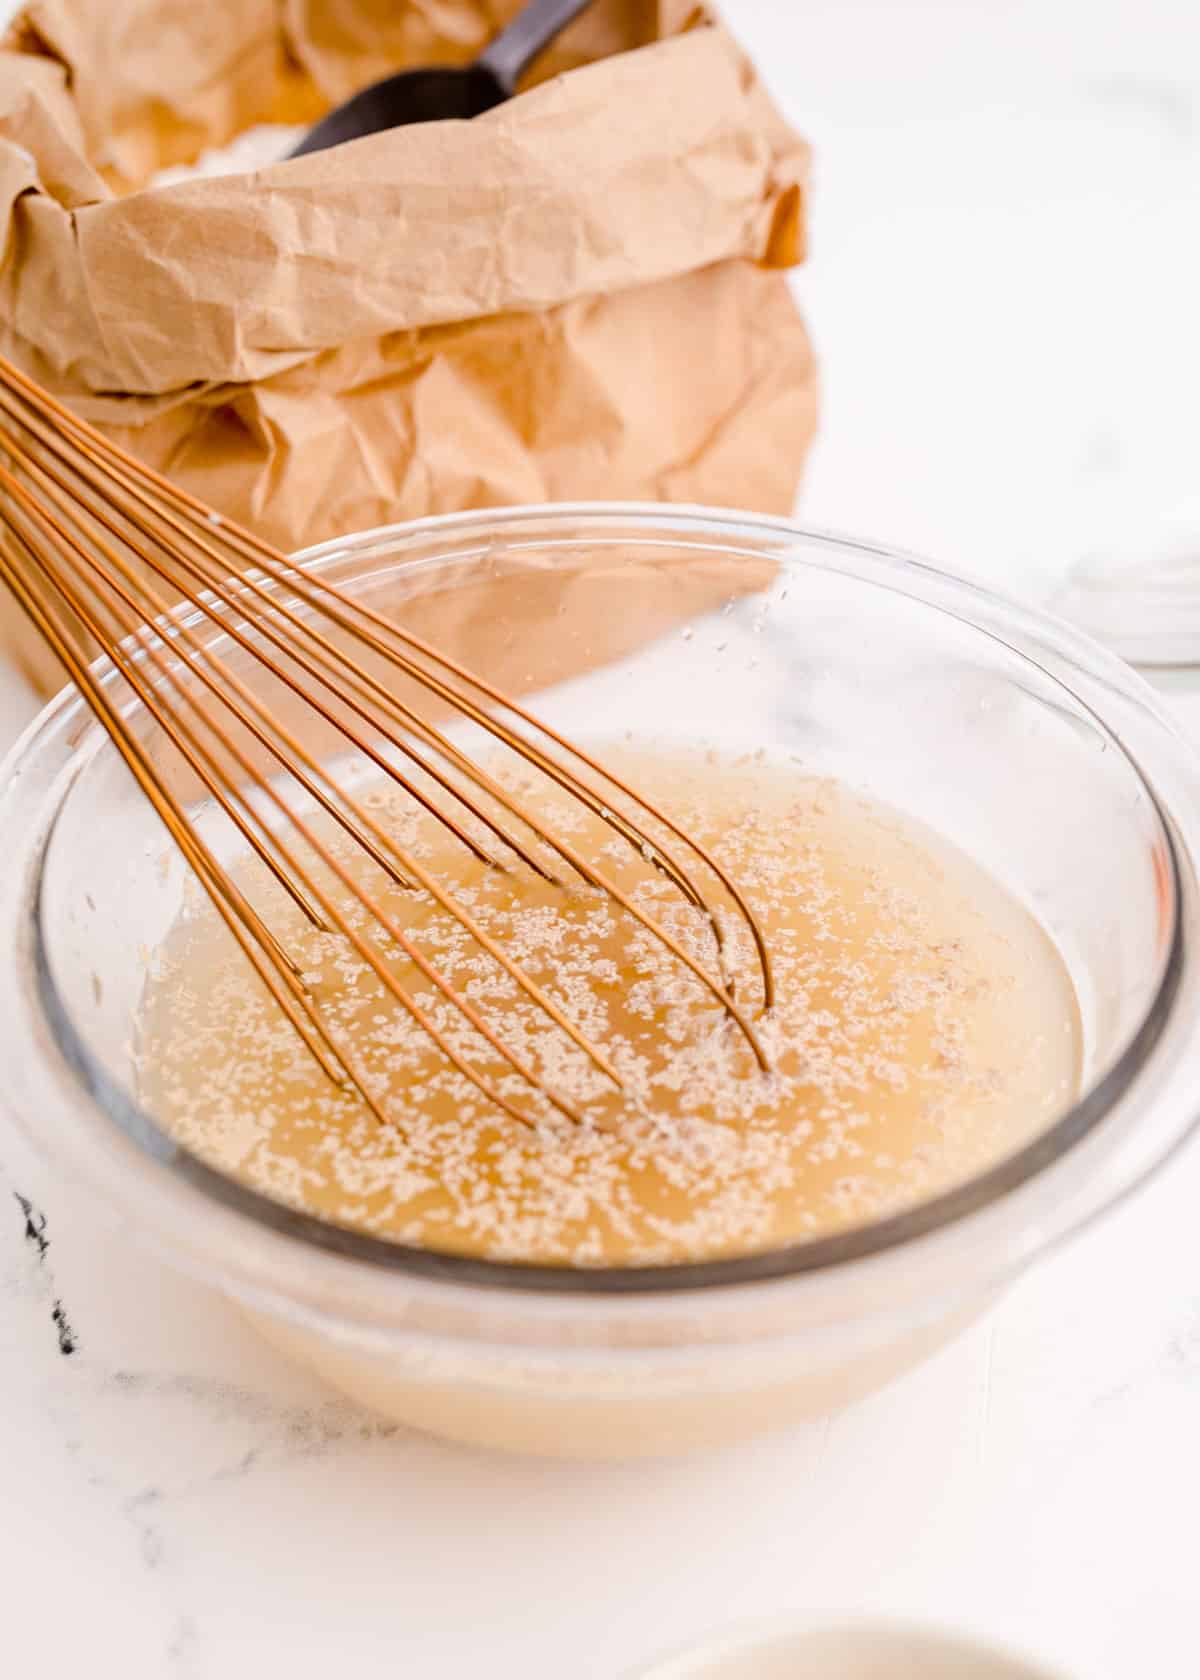 whisking together yeast, water, and maple syrup in a clear bowl